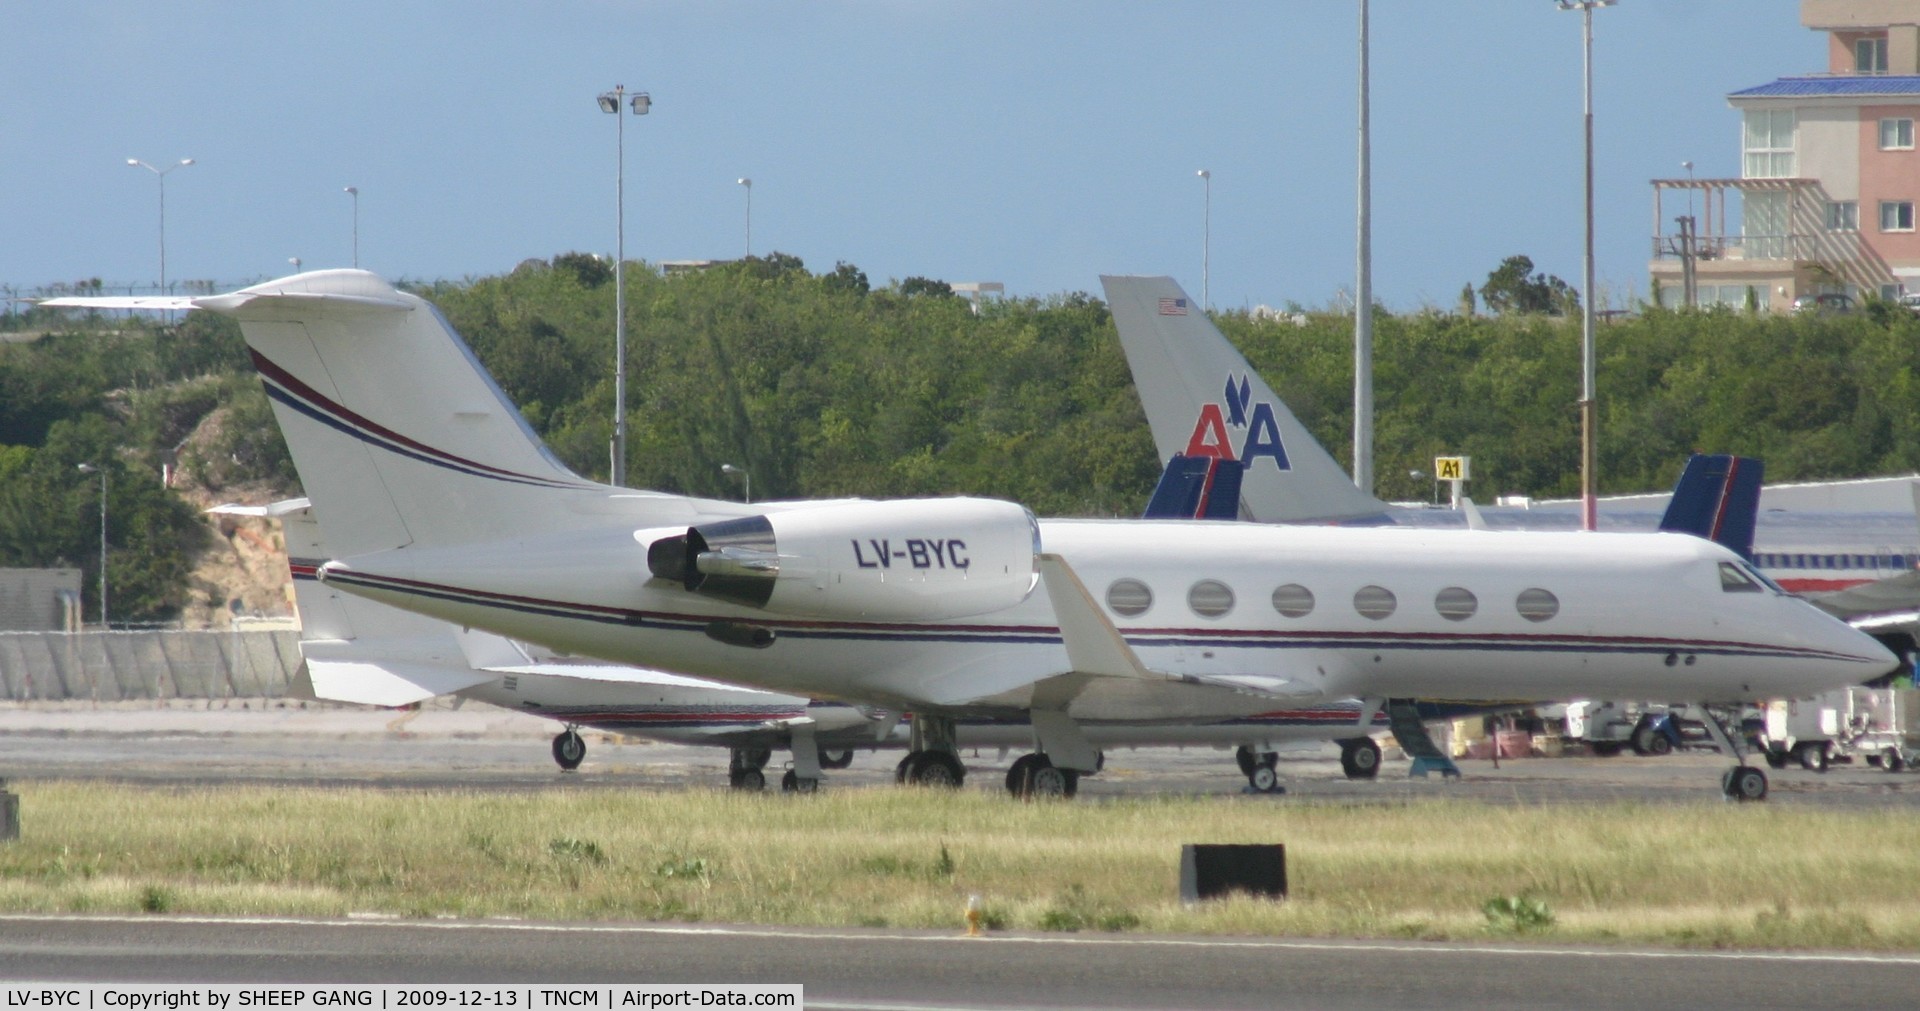 LV-BYC, 1990 Gulfstream Aerospace G-IV C/N 1145, LV-BYC park at the private ramp